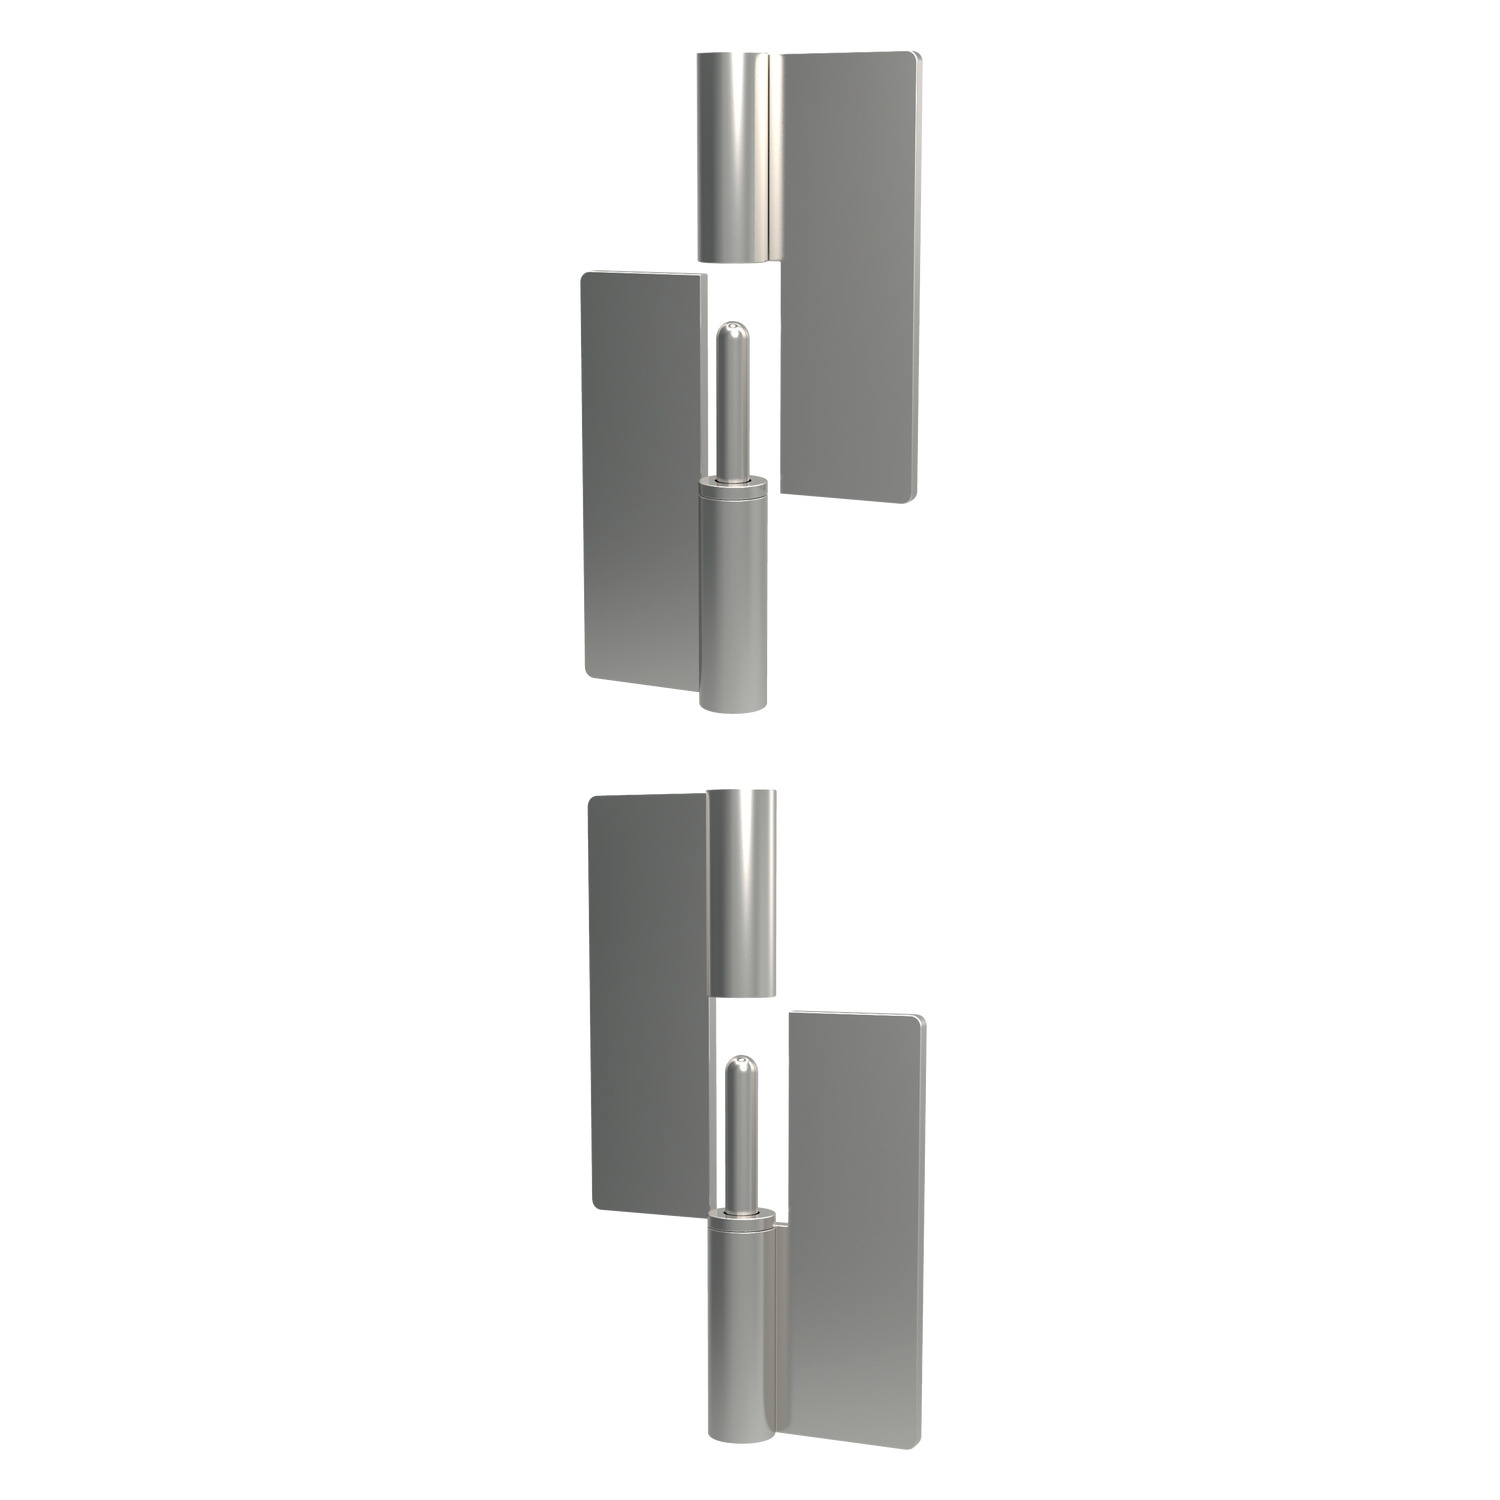 Lift-Off Hinges - Off-Set Weld-on, offset lift-off hinges, made from polished stainless steel (AISI 304).